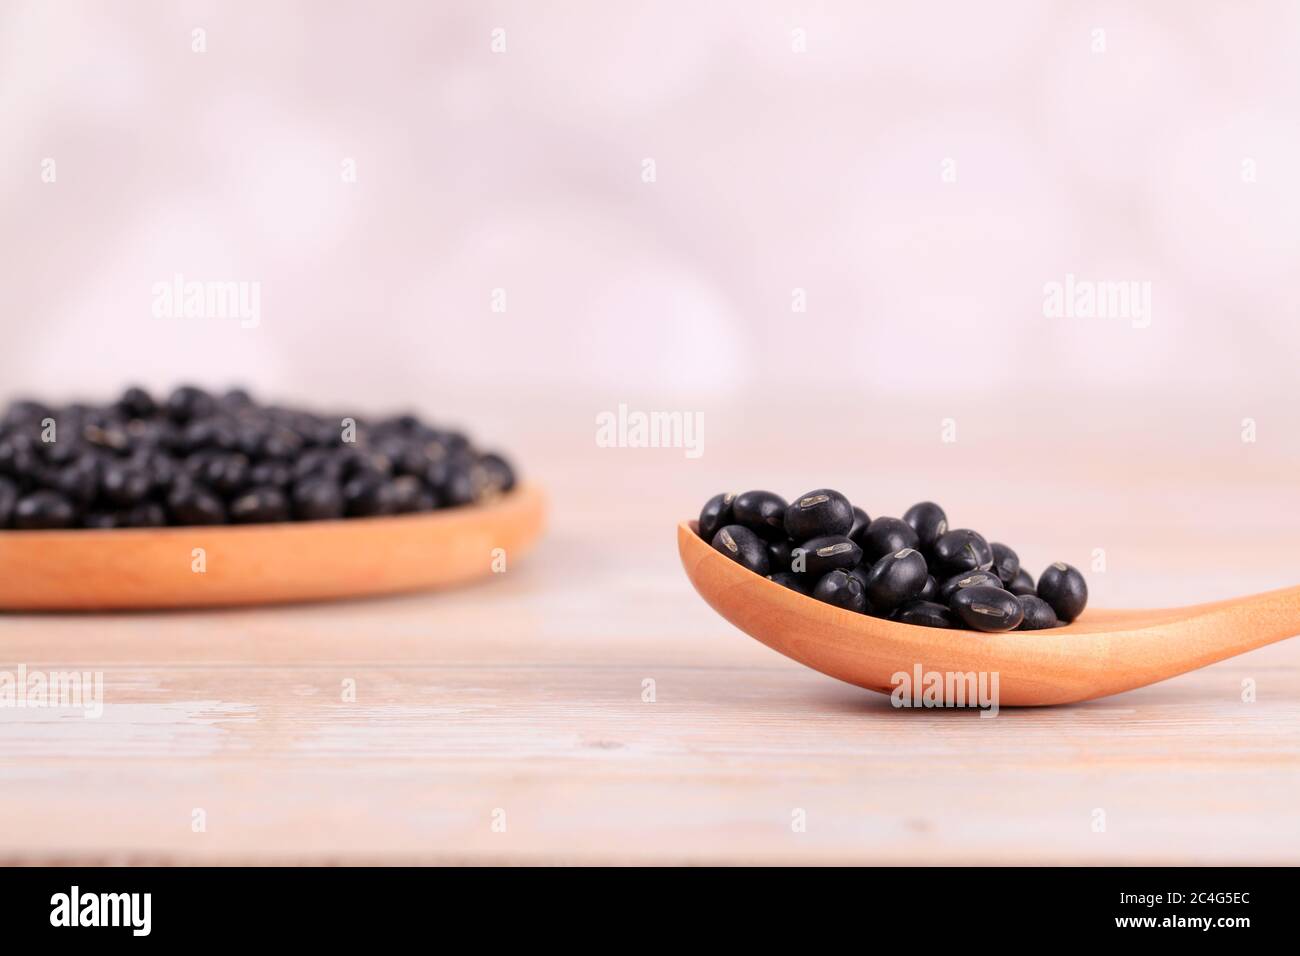 The black beans are on the wooden table Stock Photo